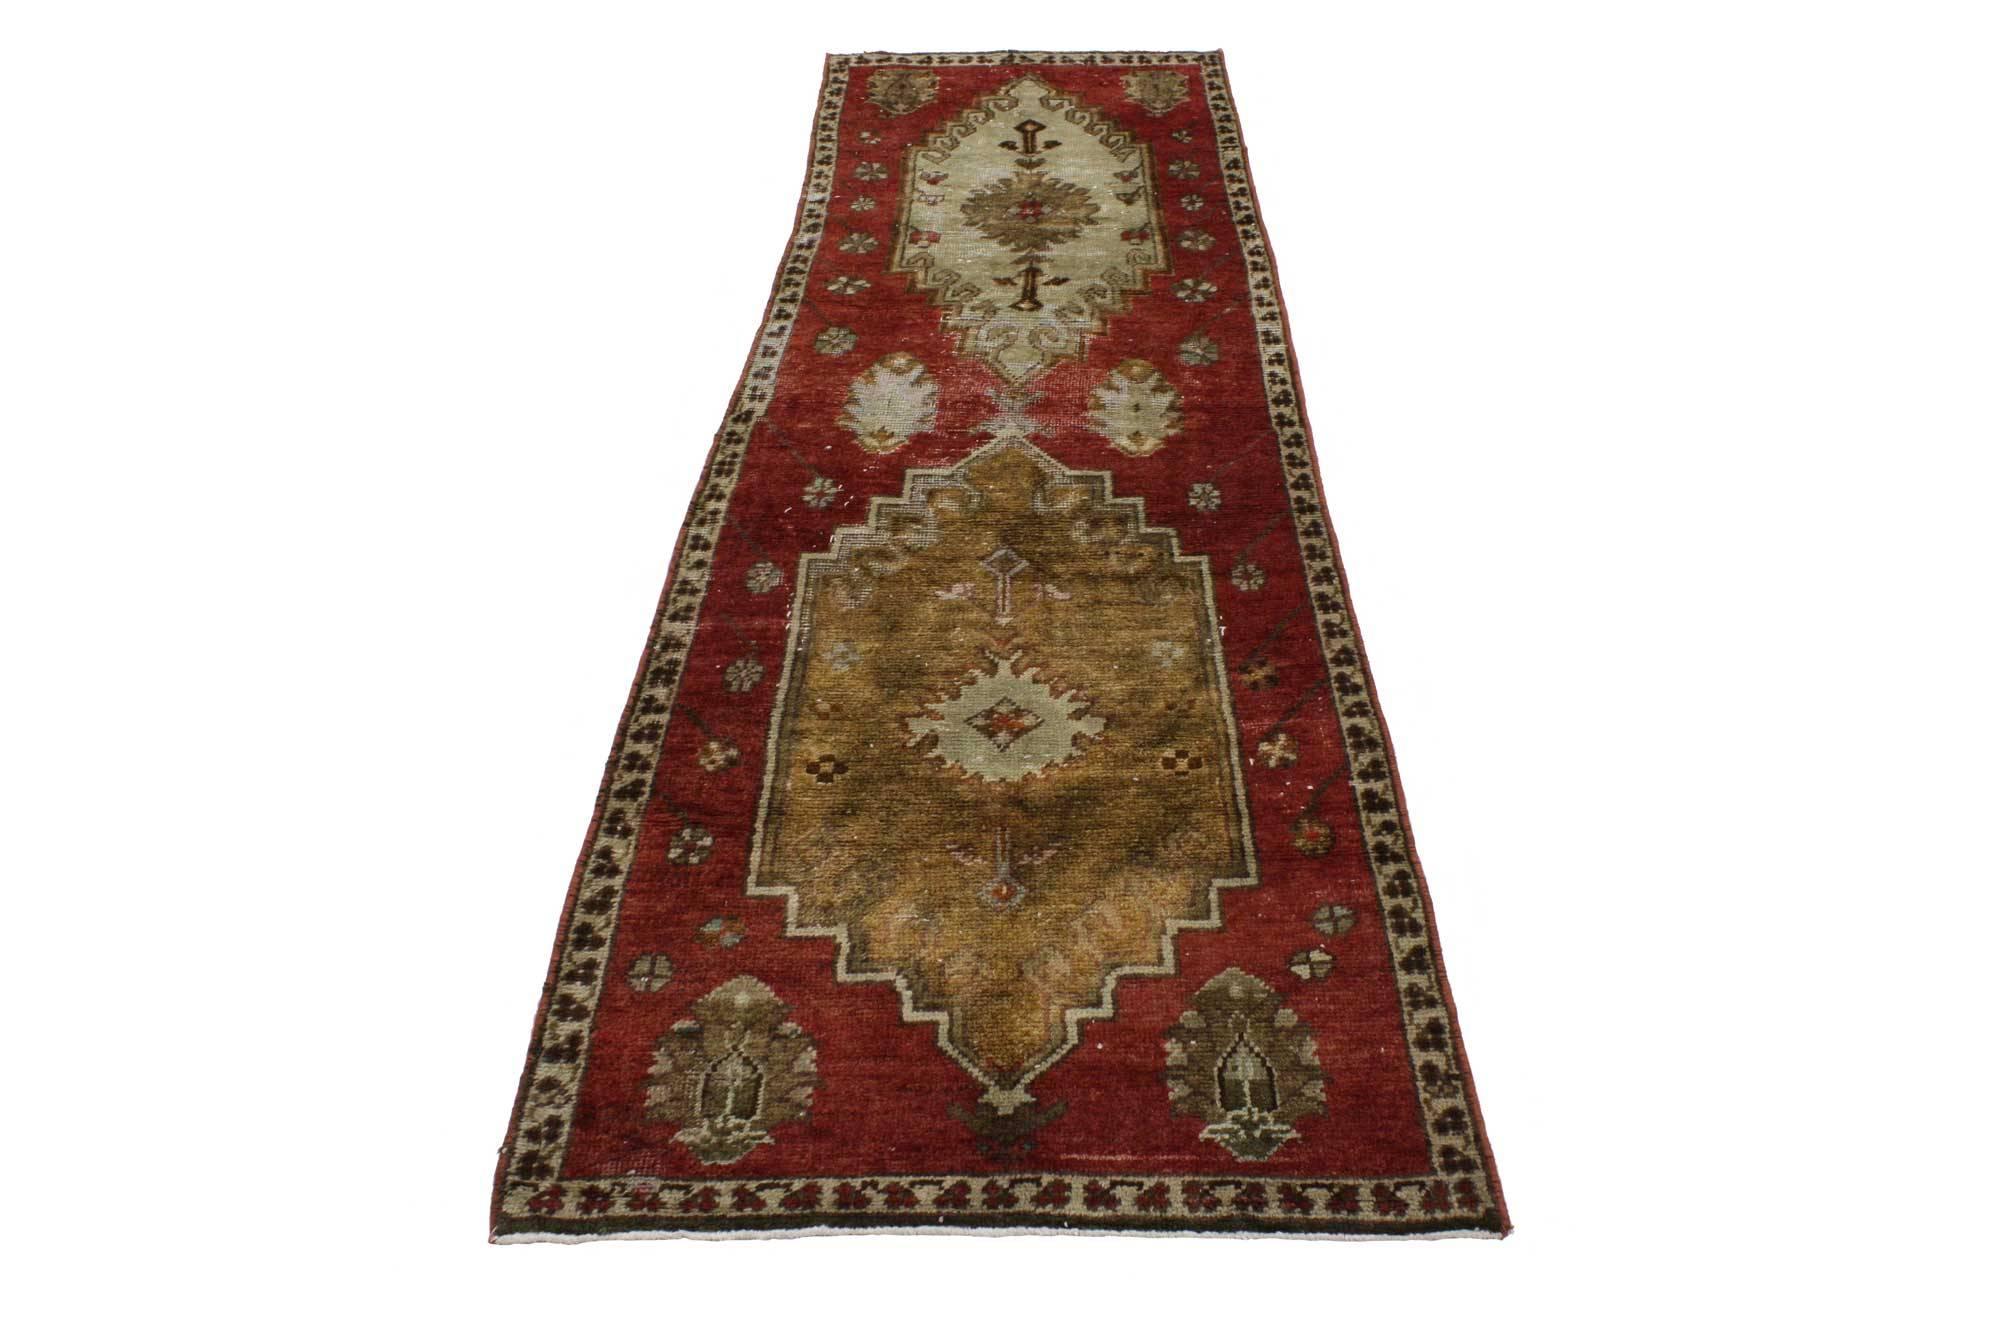 51676, vintage Turkish Oushak runner, hallway runner. This hand-knotted wool vintage Turkish Oushak runner features two stair-step medallions each filled with a Turkish flower flanked by two rods in a red field dotted with flowers. A thin border